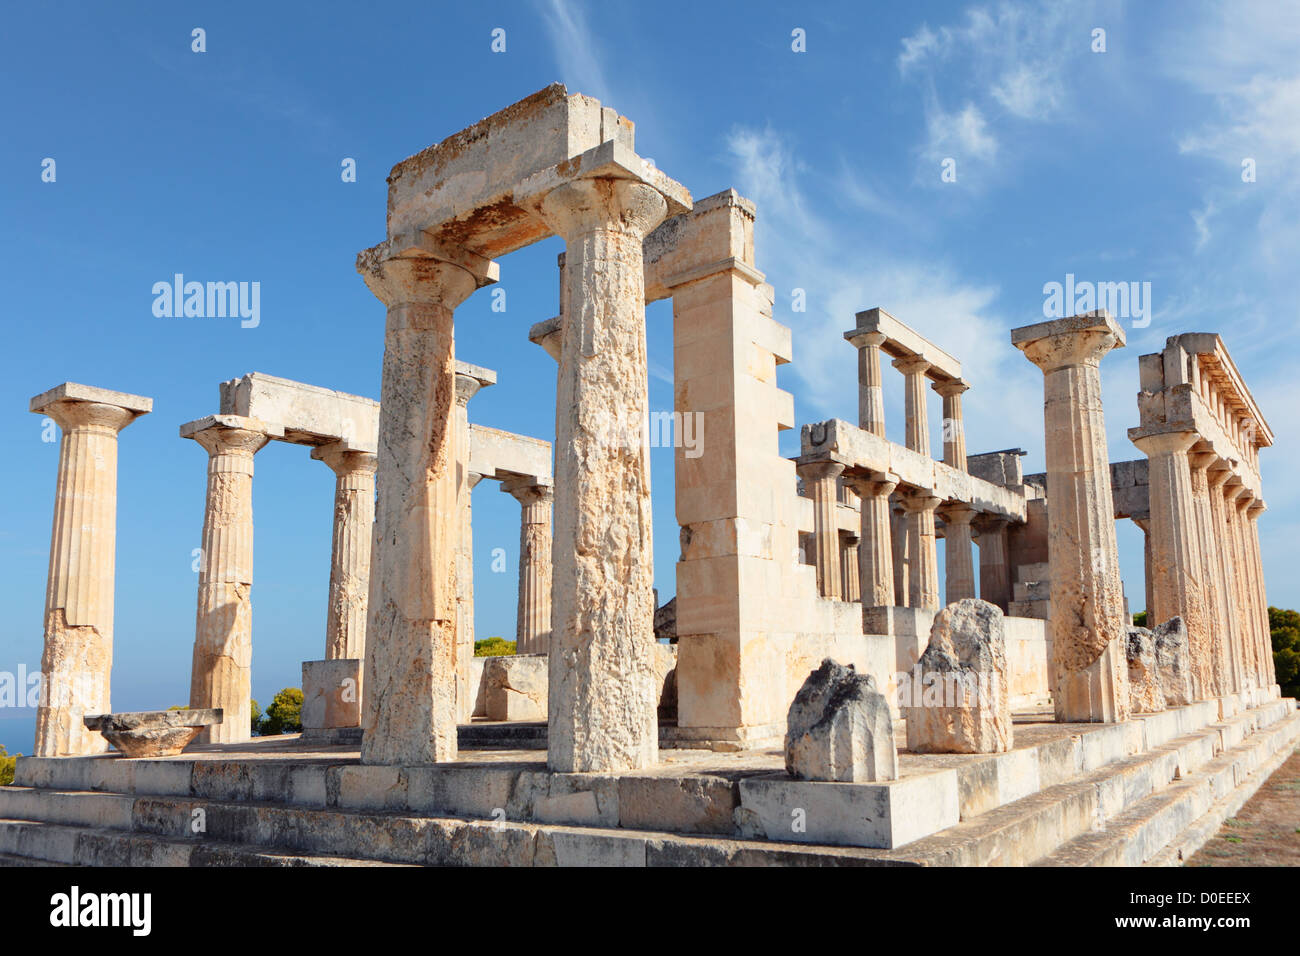 A view of the Doric temple of Aphaia on Aegina island in the Saronic Gulf, south of Athens. Stock Photo